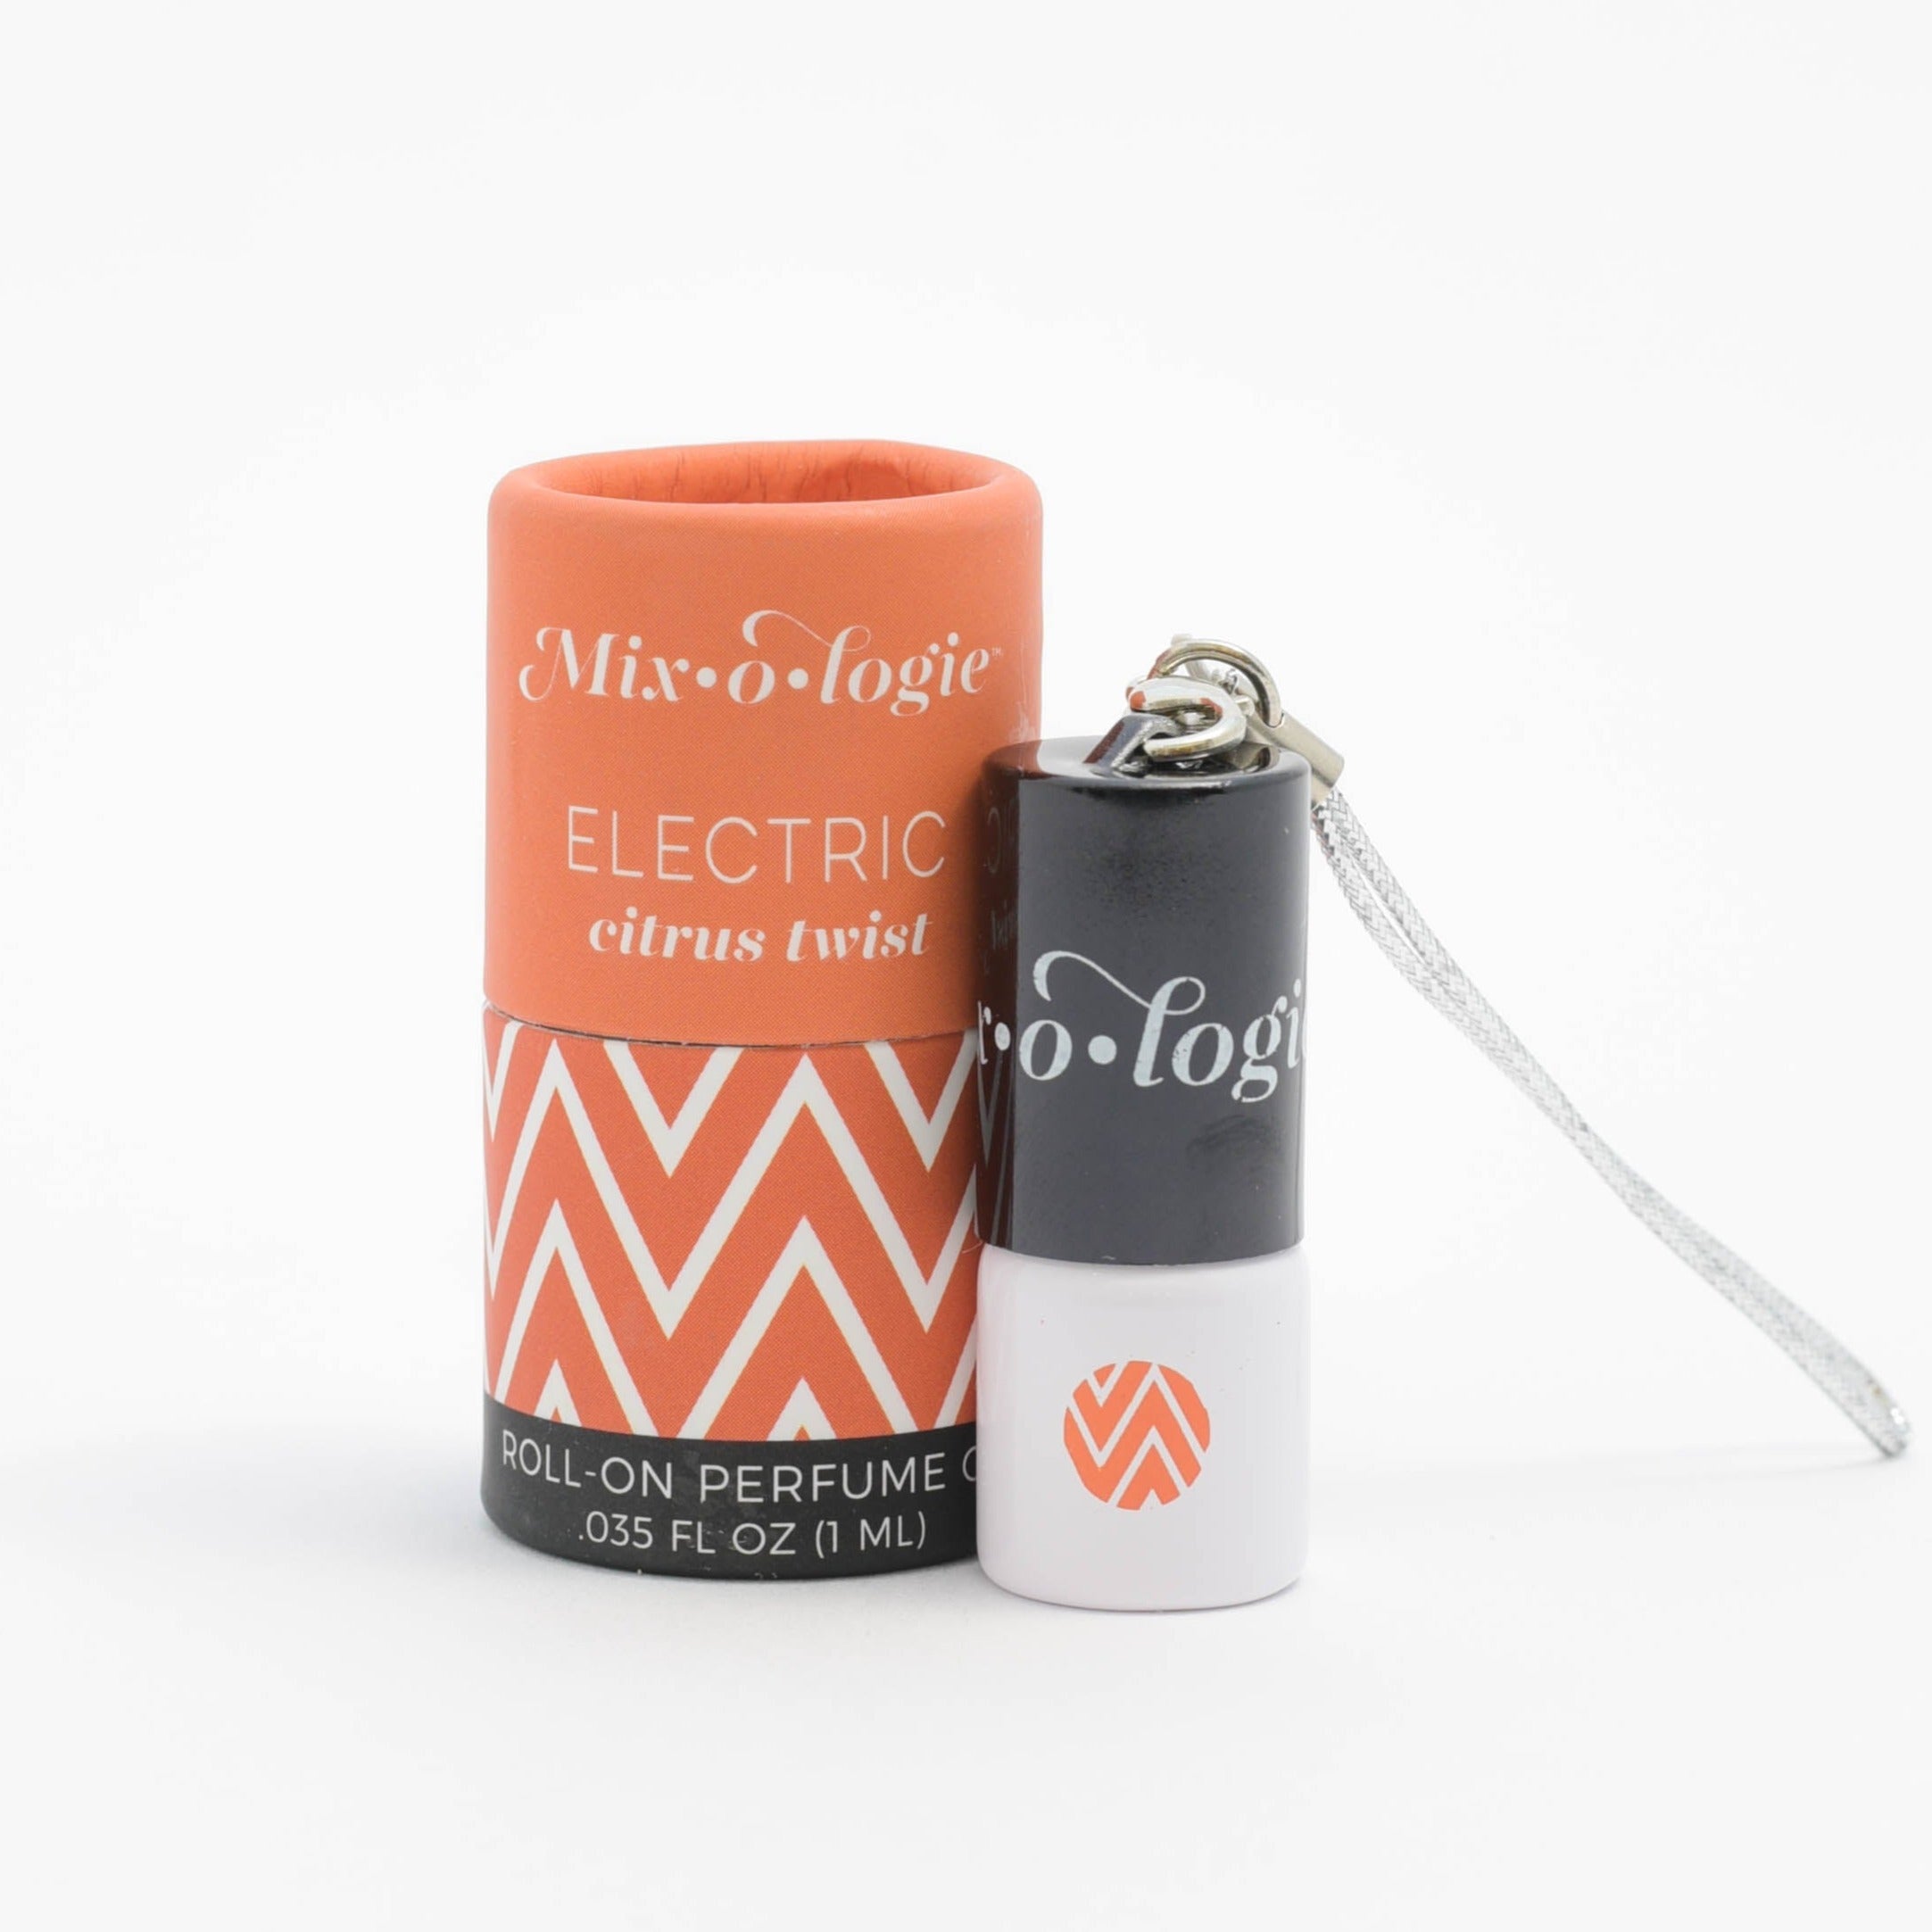 Electric (Citrus Twist) mini white cylinder rollerballs with black top and keychain attachment with orange chevron has .035 fl oz or 1 mL. Orange cylinder packing tube with orange chevron. Roll-on perfume oil. Mini rollerball and cylinder tube are in sand on a white background.